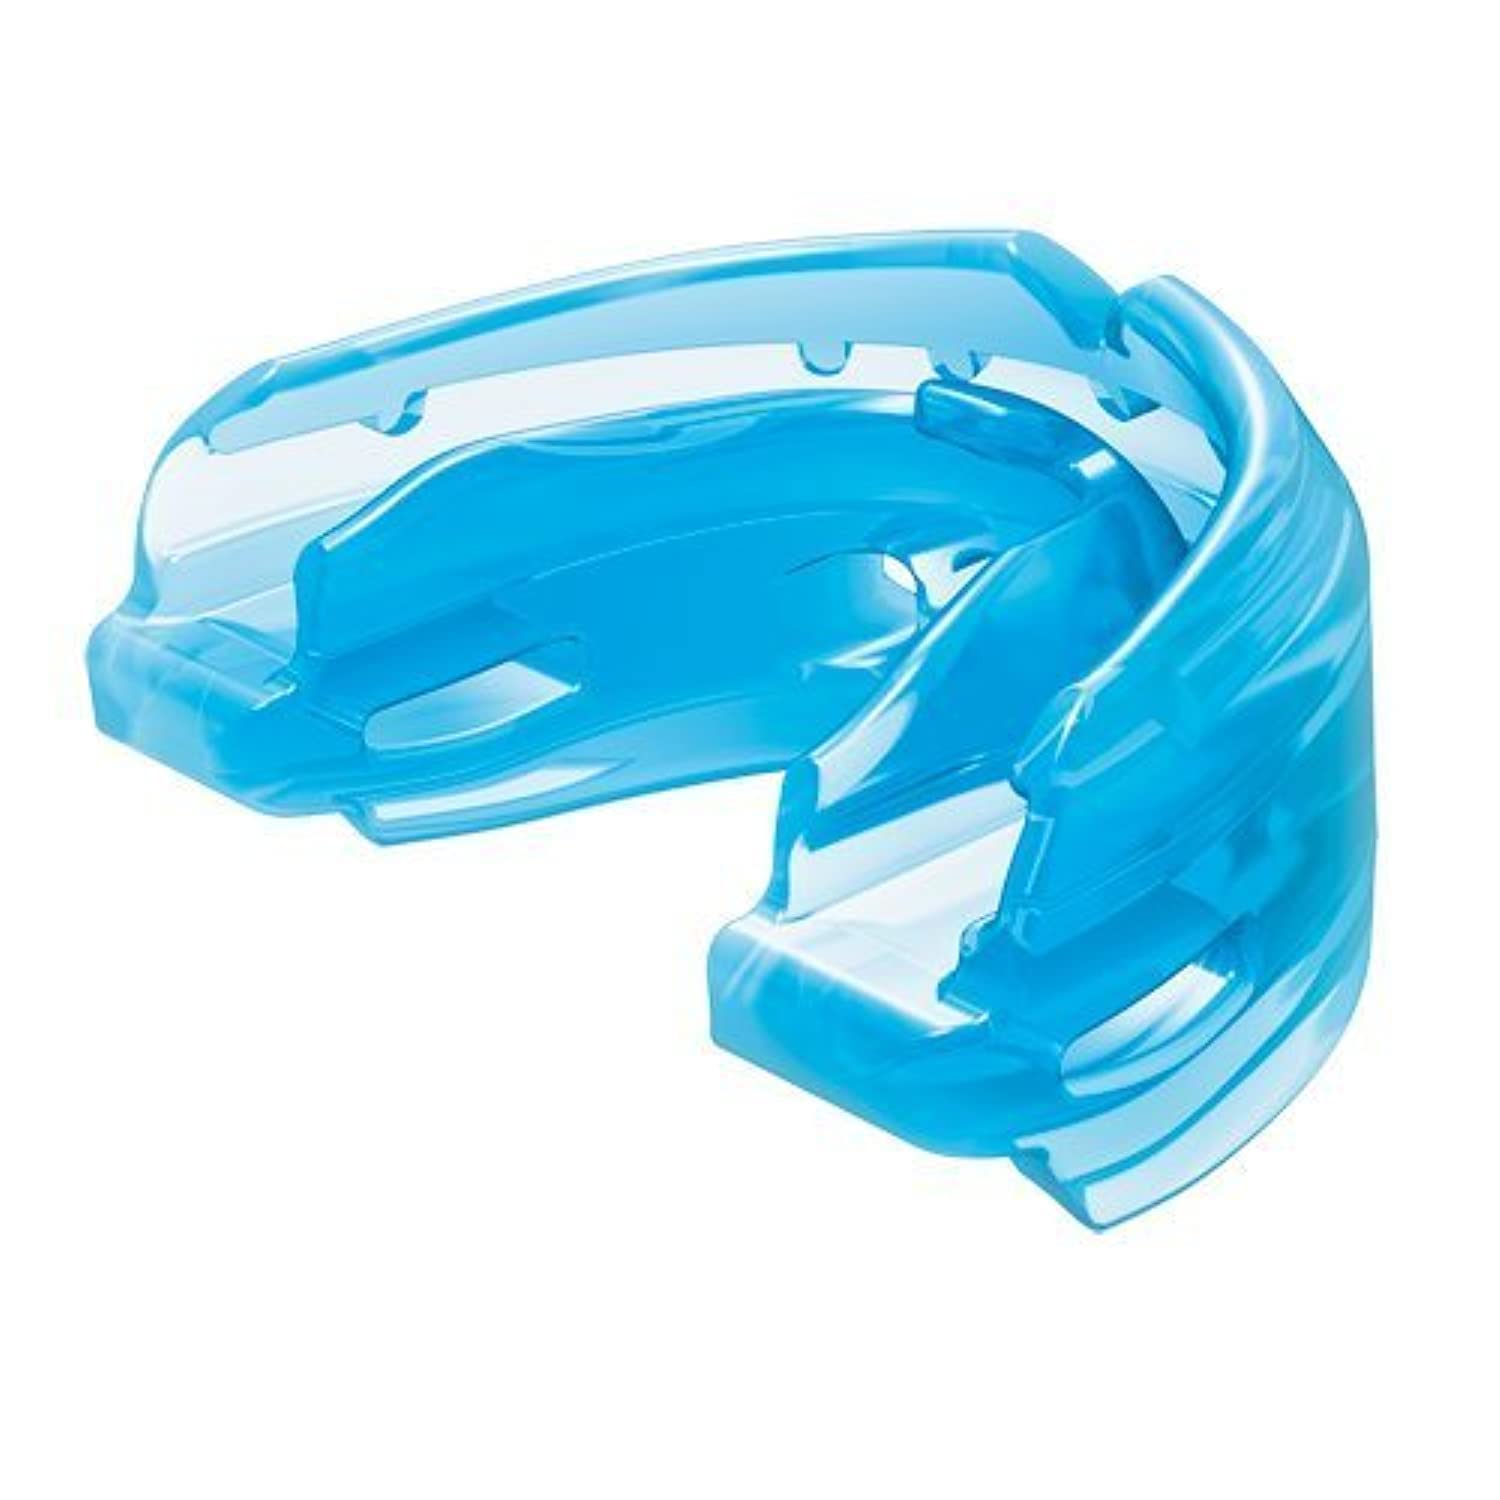 Shock Doctor Double Braces Mouth Guard. Upper and Lower Teeth Protection. Mouthguard No Boil / Instant Fit. For Youth, Teenager, Kids and Adults. Mouth Piece OSFA